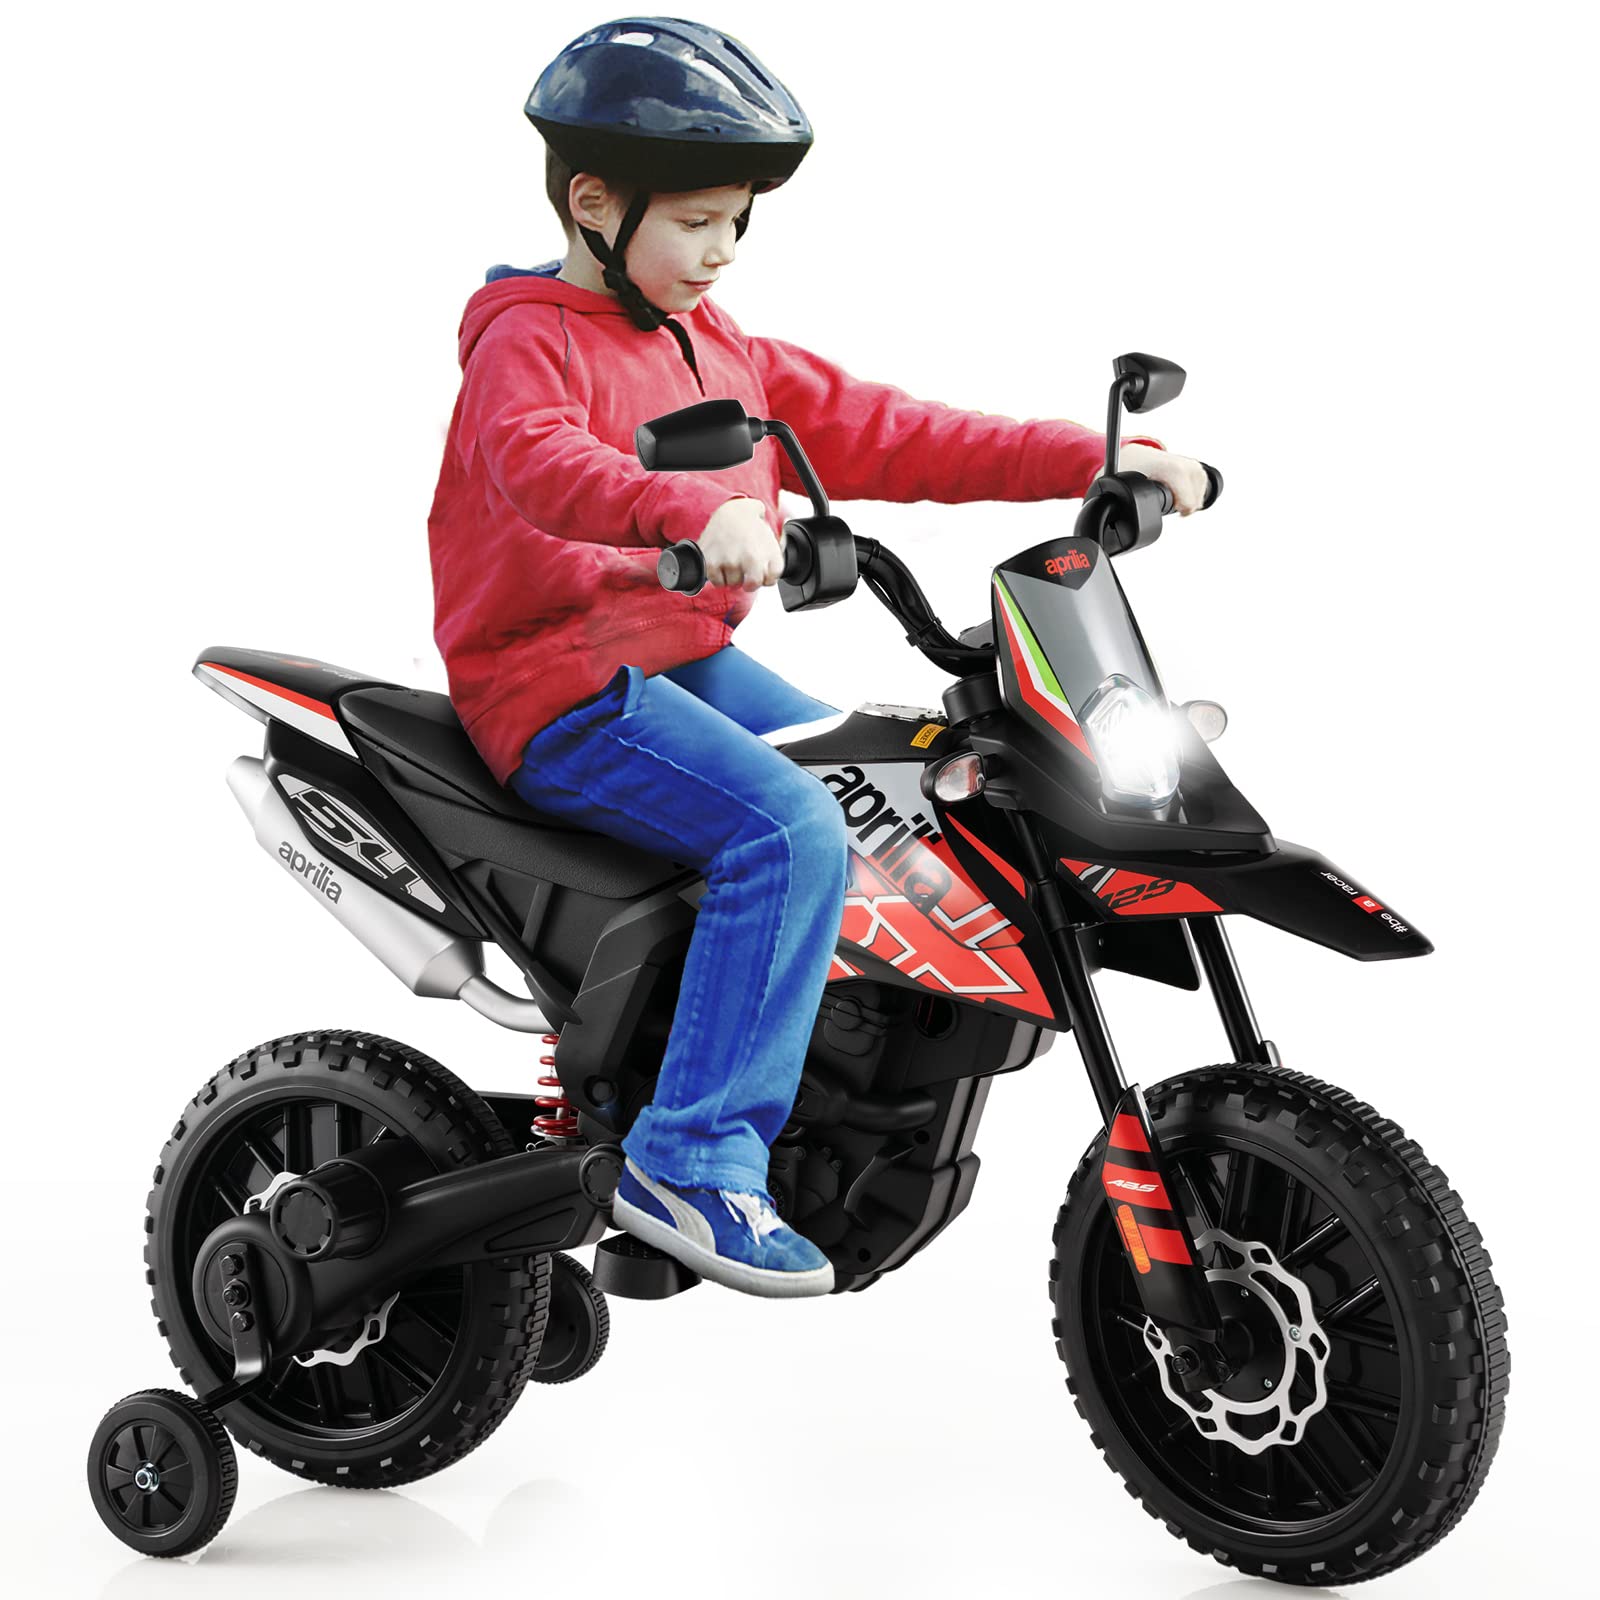 Best Toddler Motorbike: Top Picks for Safe and Fun Riding (2023)